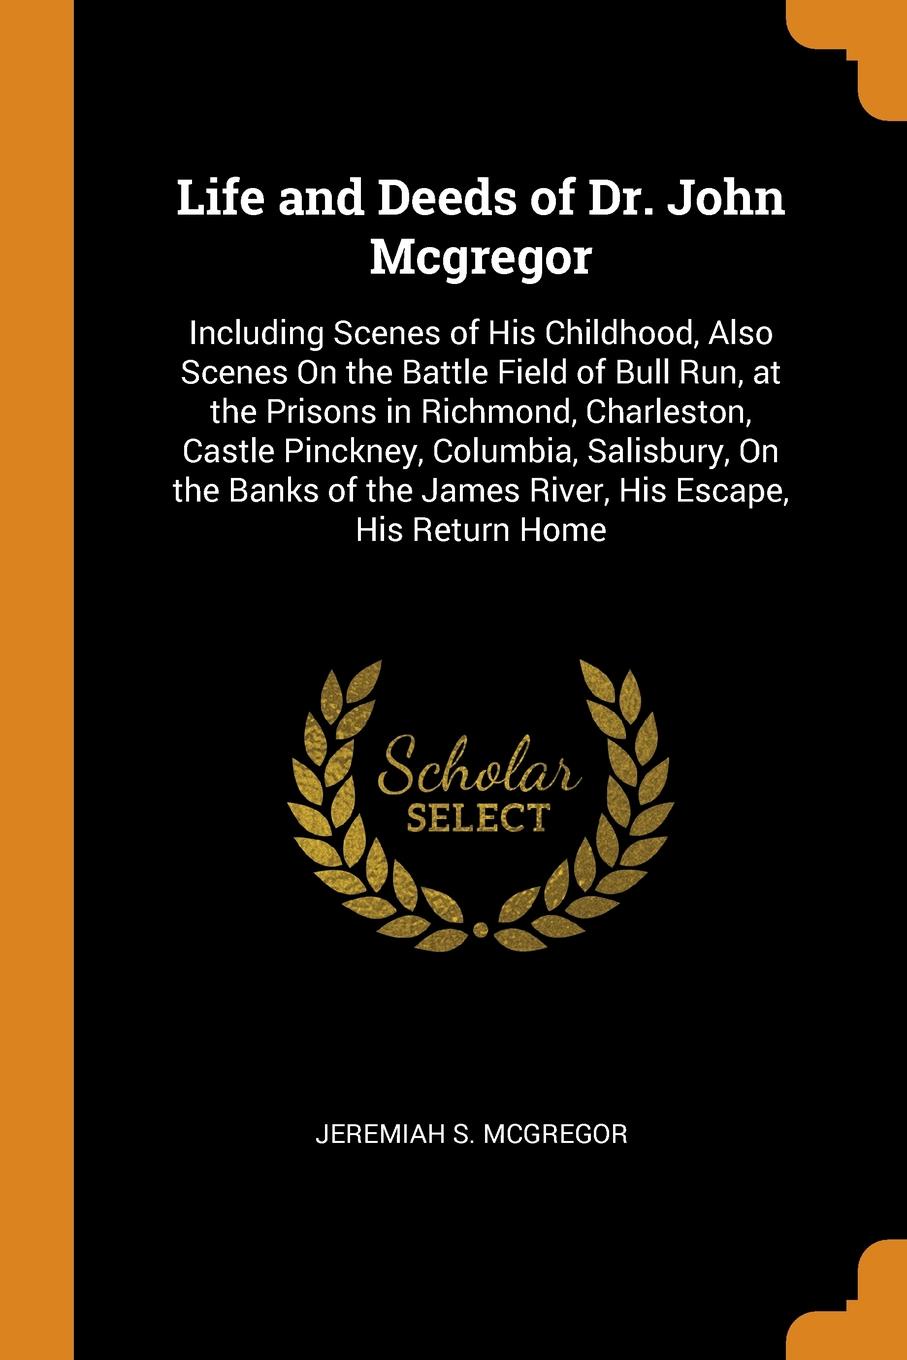 Life and Deeds of Dr. John Mcgregor. Including Scenes of His Childhood, Also Scenes On the Battle Field of Bull Run, at the Prisons in Richmond, Charleston, Castle Pinckney, Columbia, Salisbury, On the Banks of the James River, His Escape, His Ret...